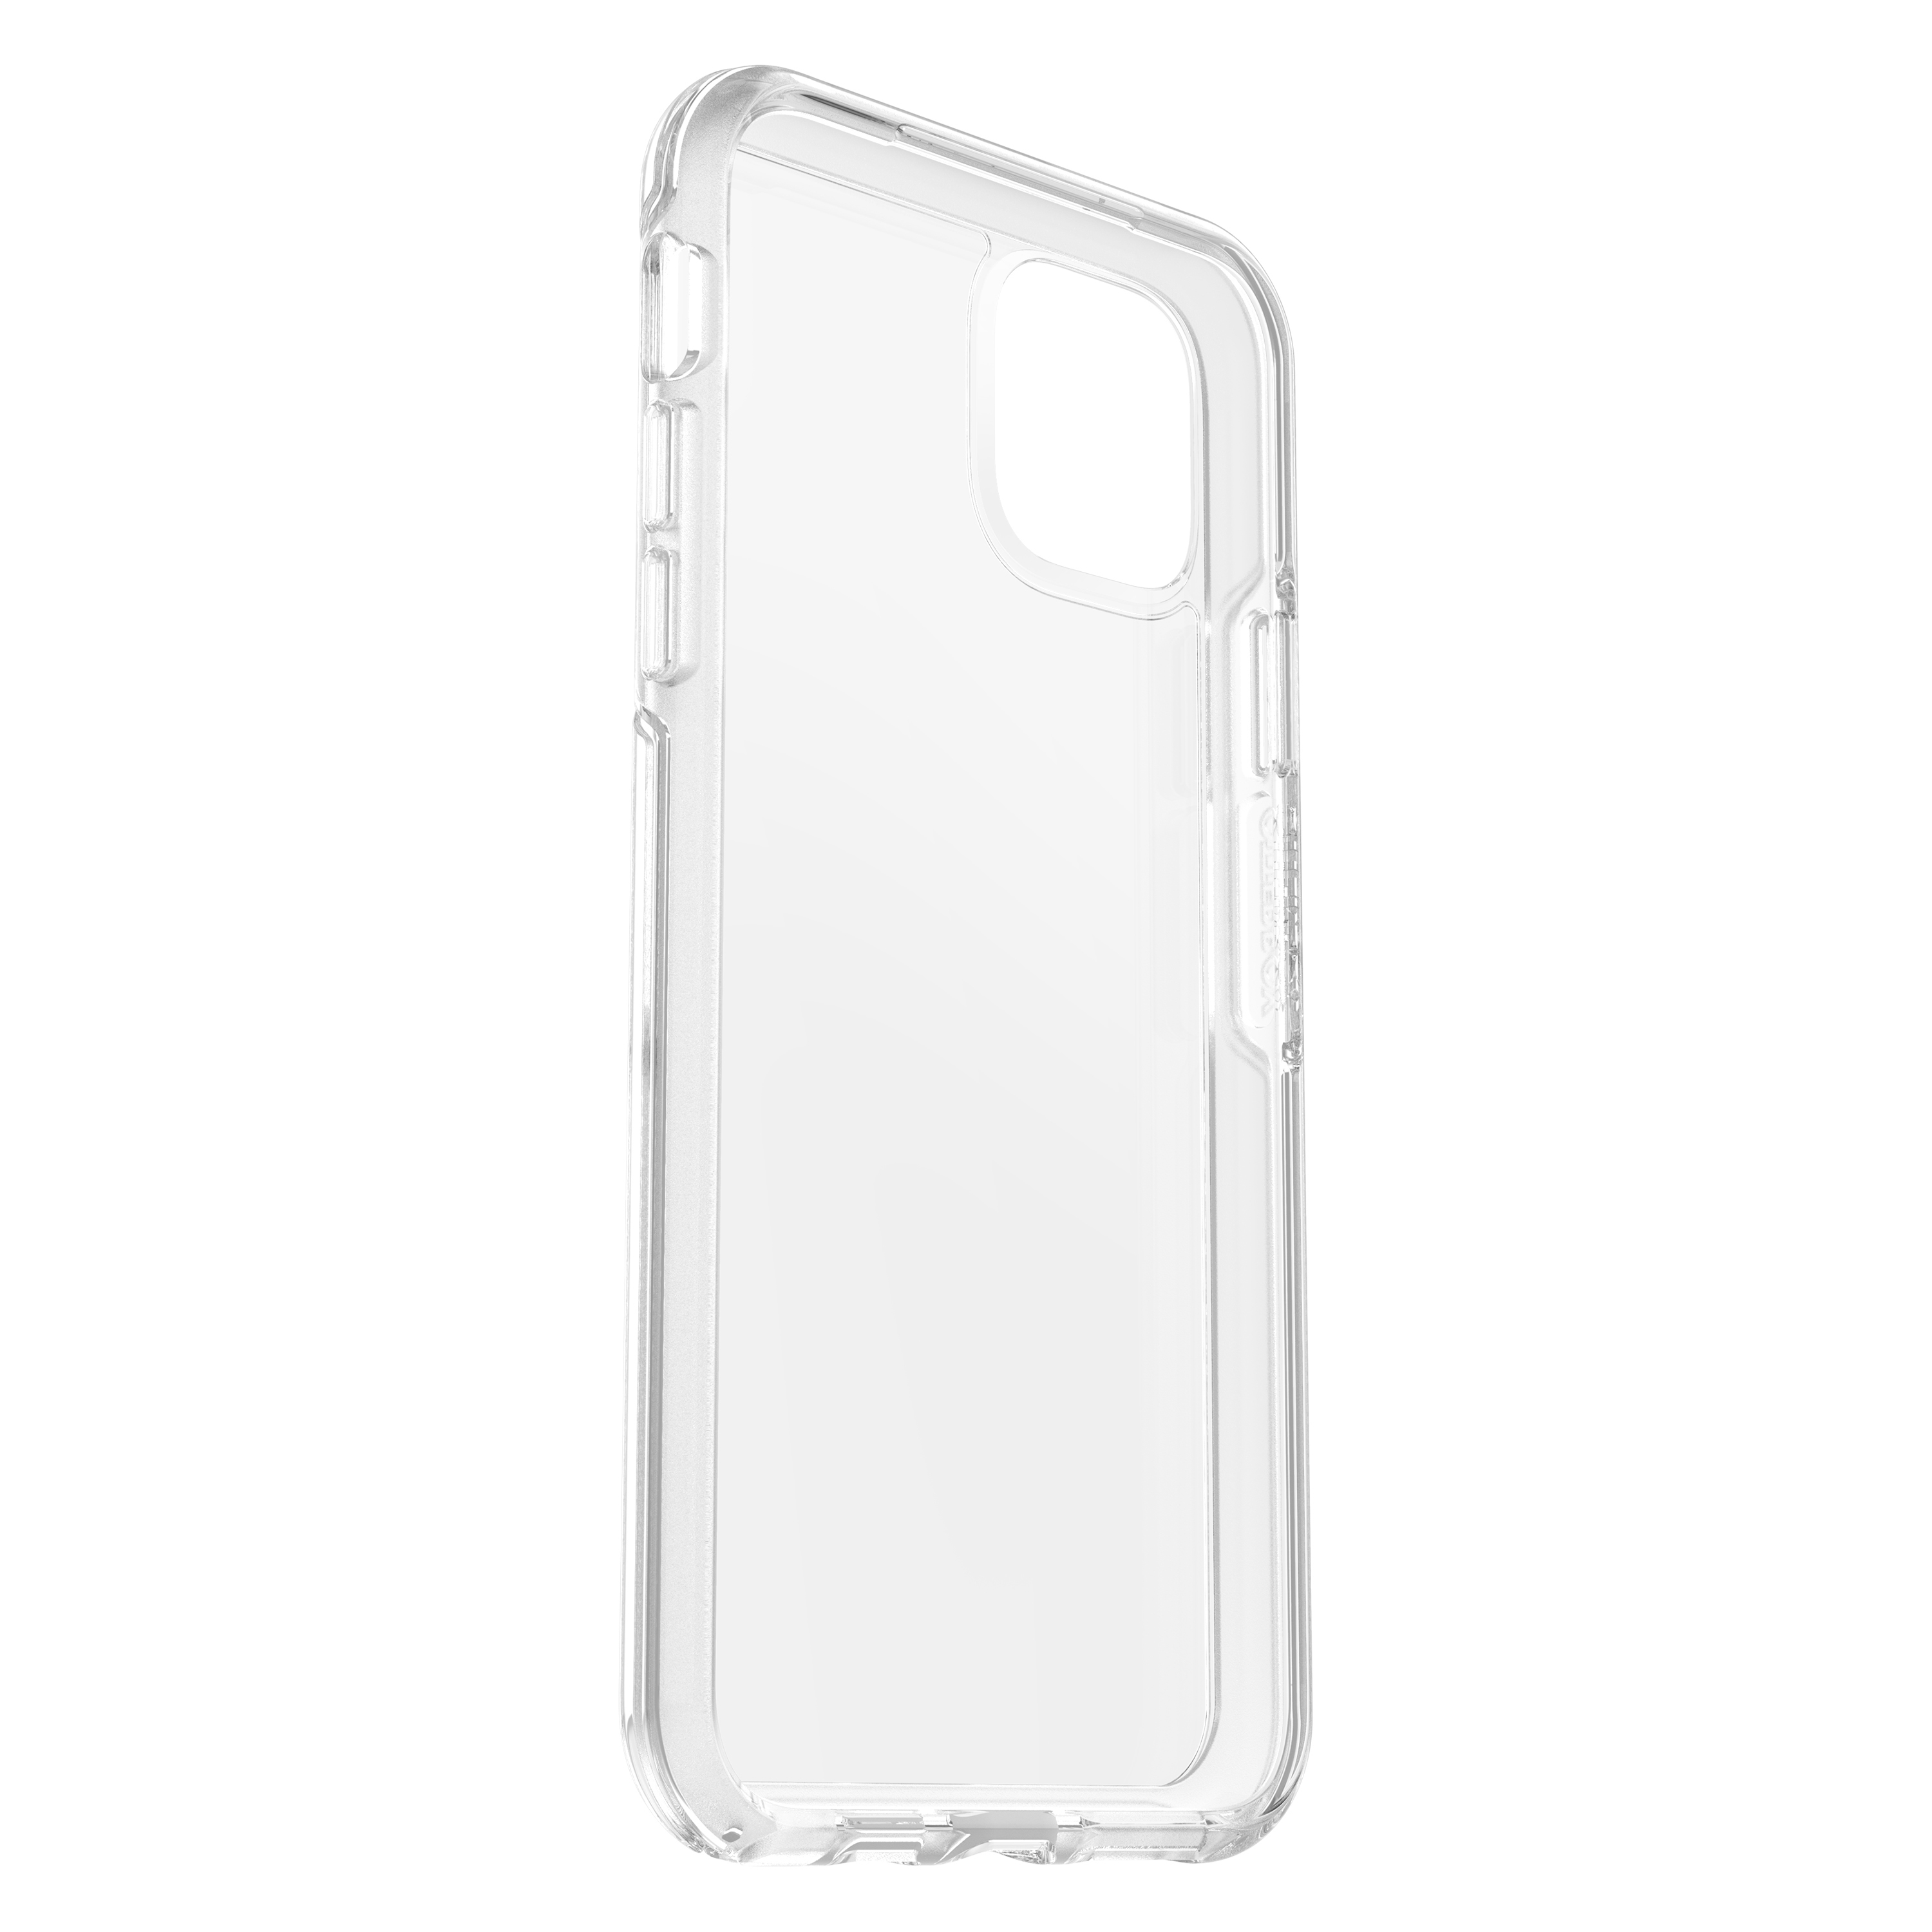 Symmetry Apple, iPhone OTTERBOX 11 Pro Transparent Max, Backcover, Clear,